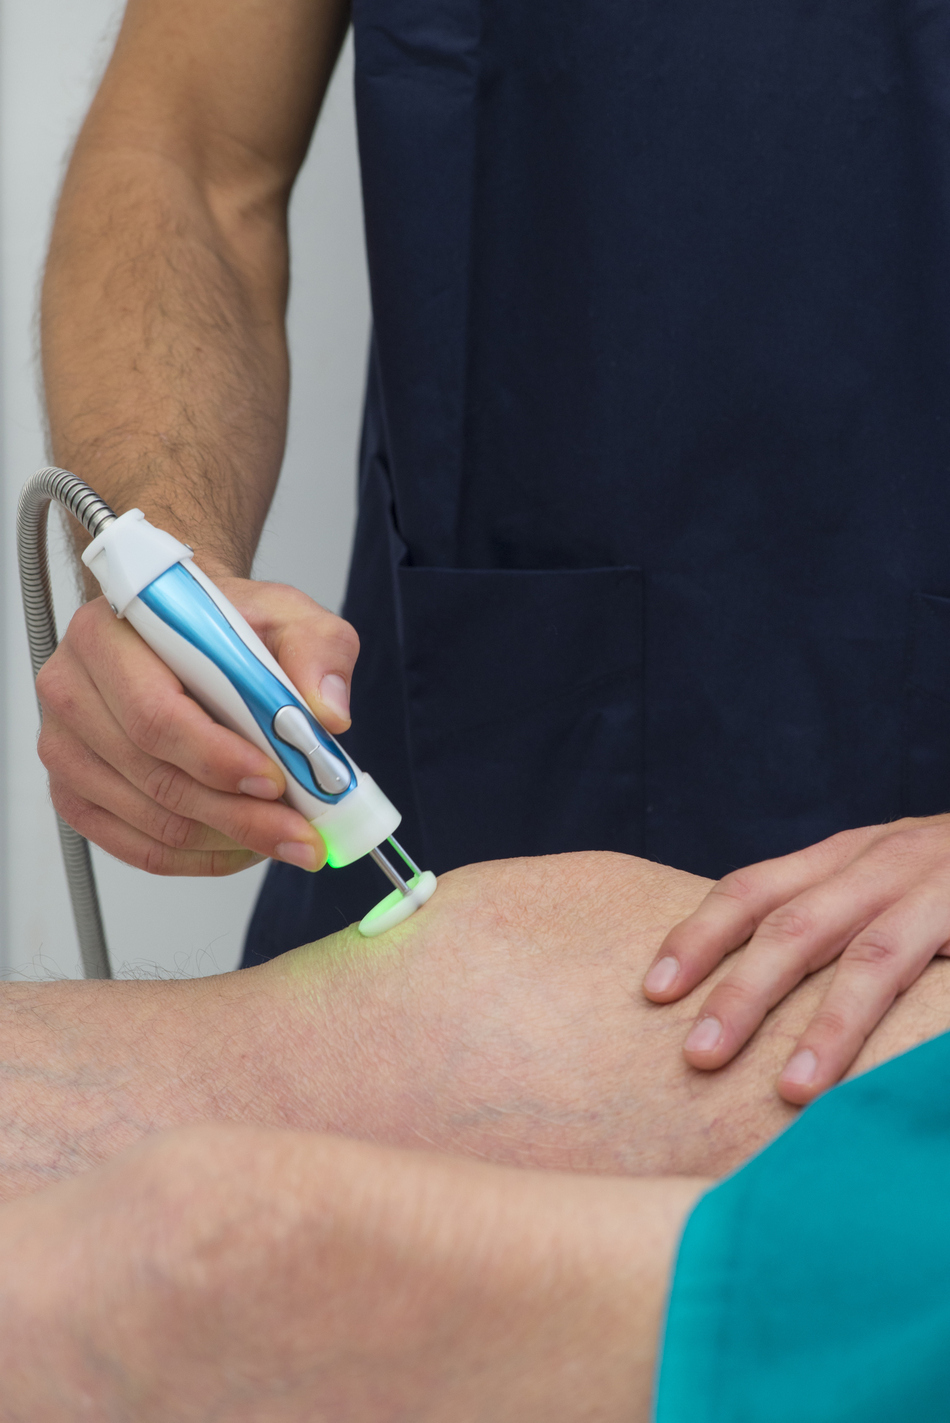 Ultrasound for Your Joints and Bones